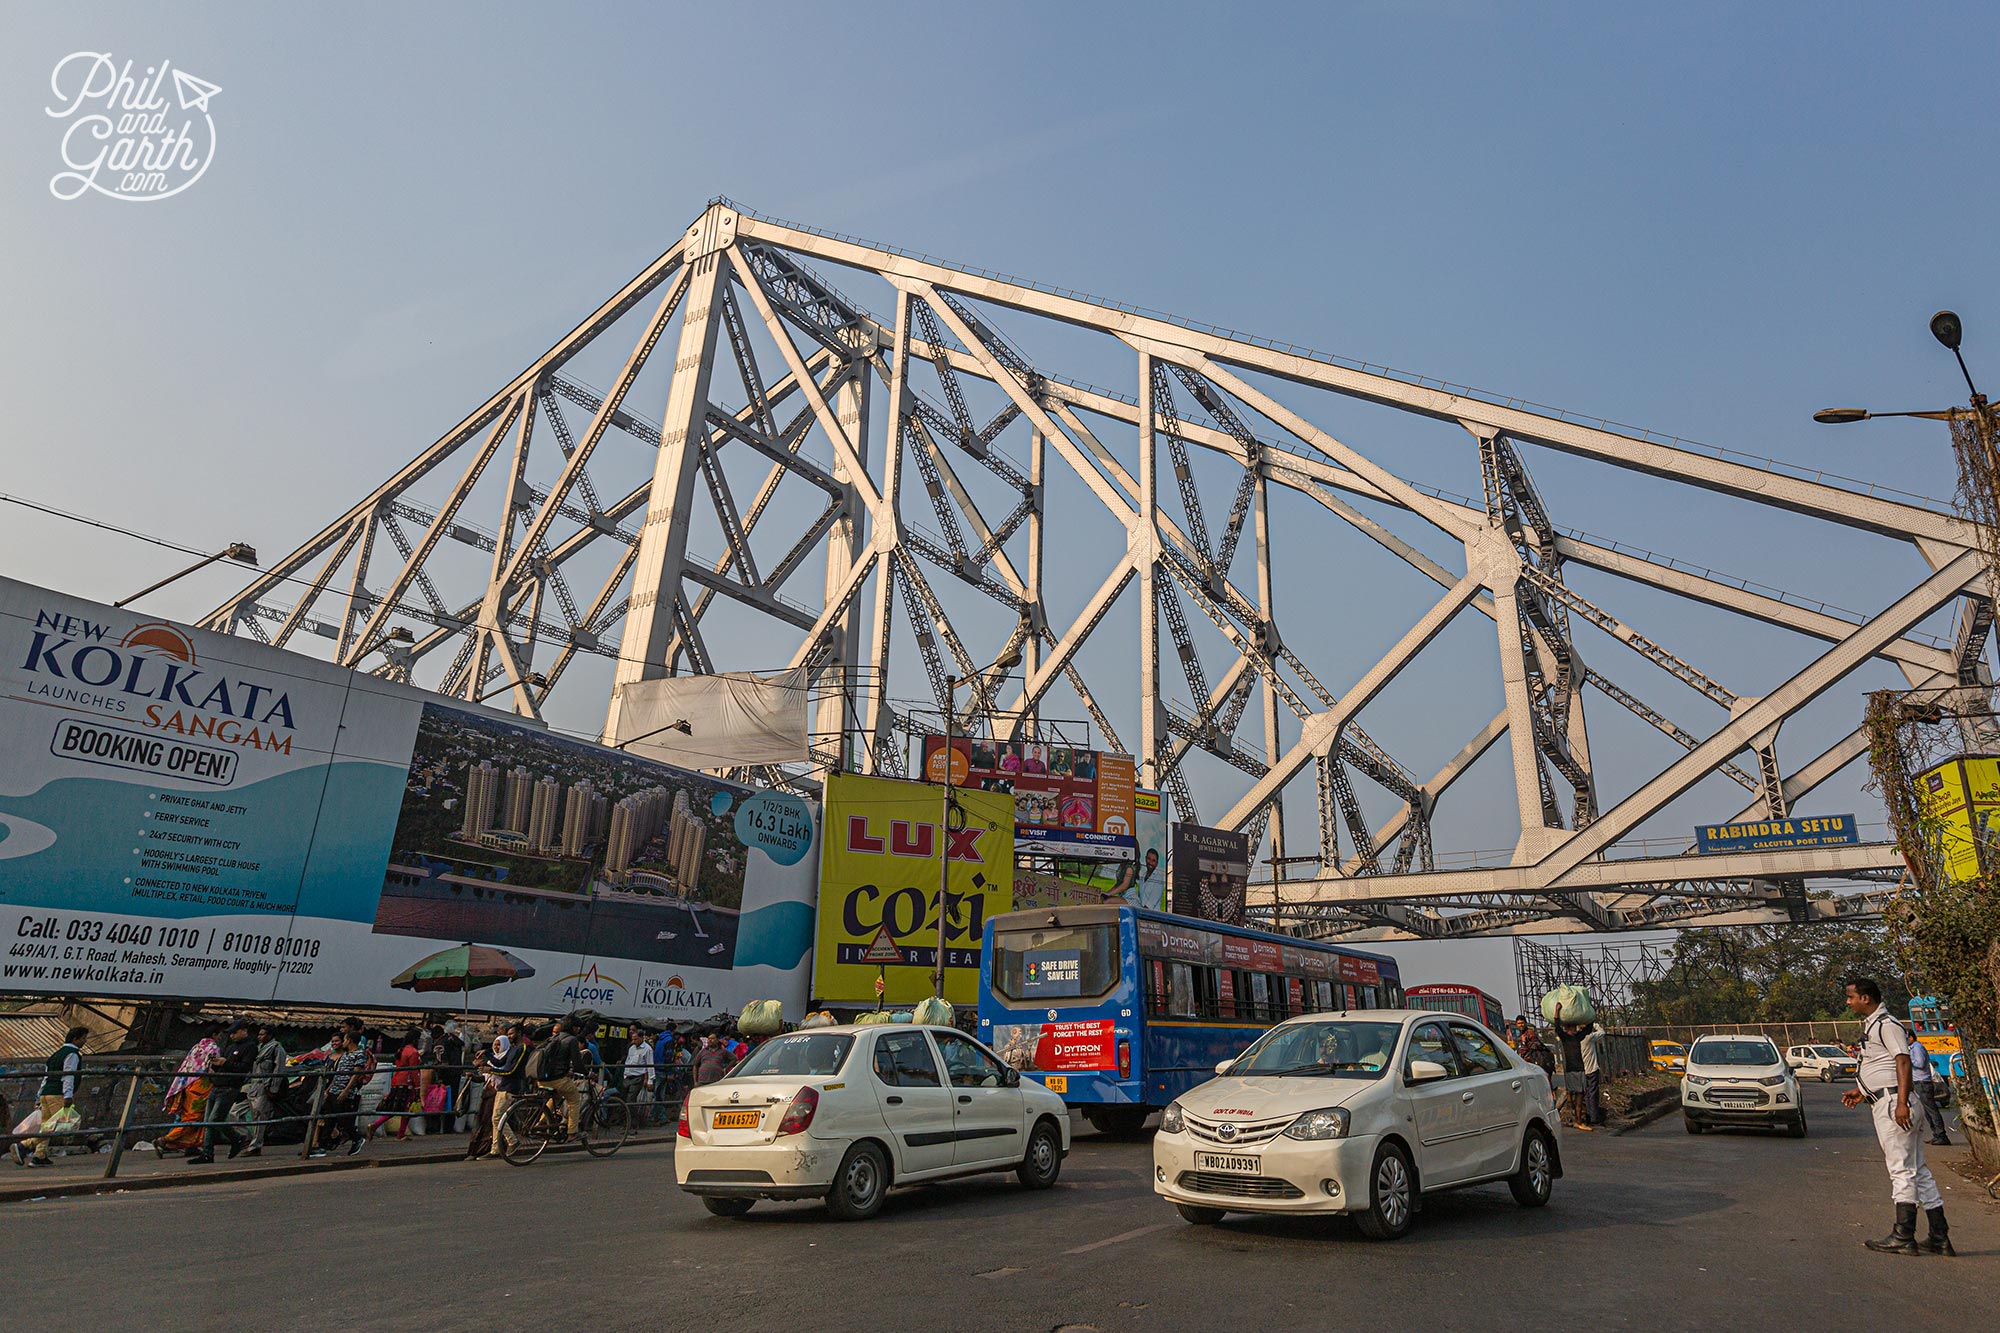 The Howrah Bridge has no nuts or bolts, it was assembled entirely with rivets